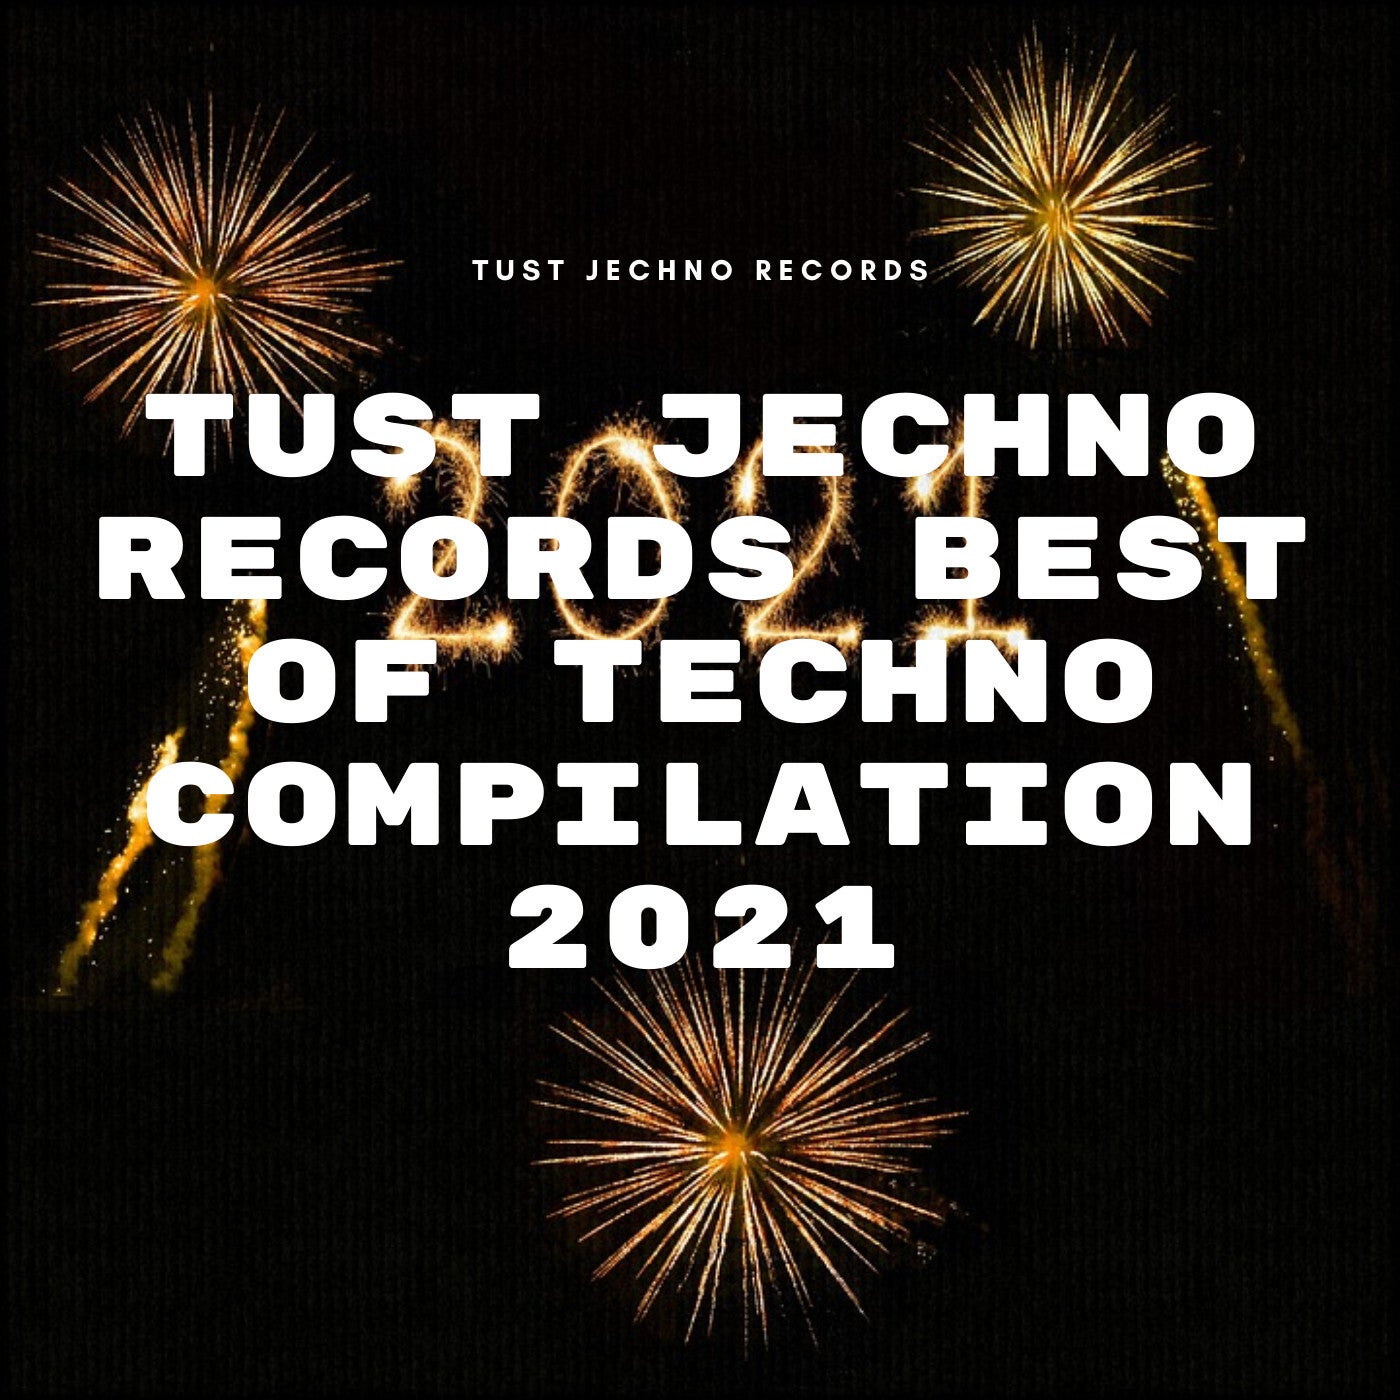 Tust Jechno Records Best Of Techno Compilation 2021